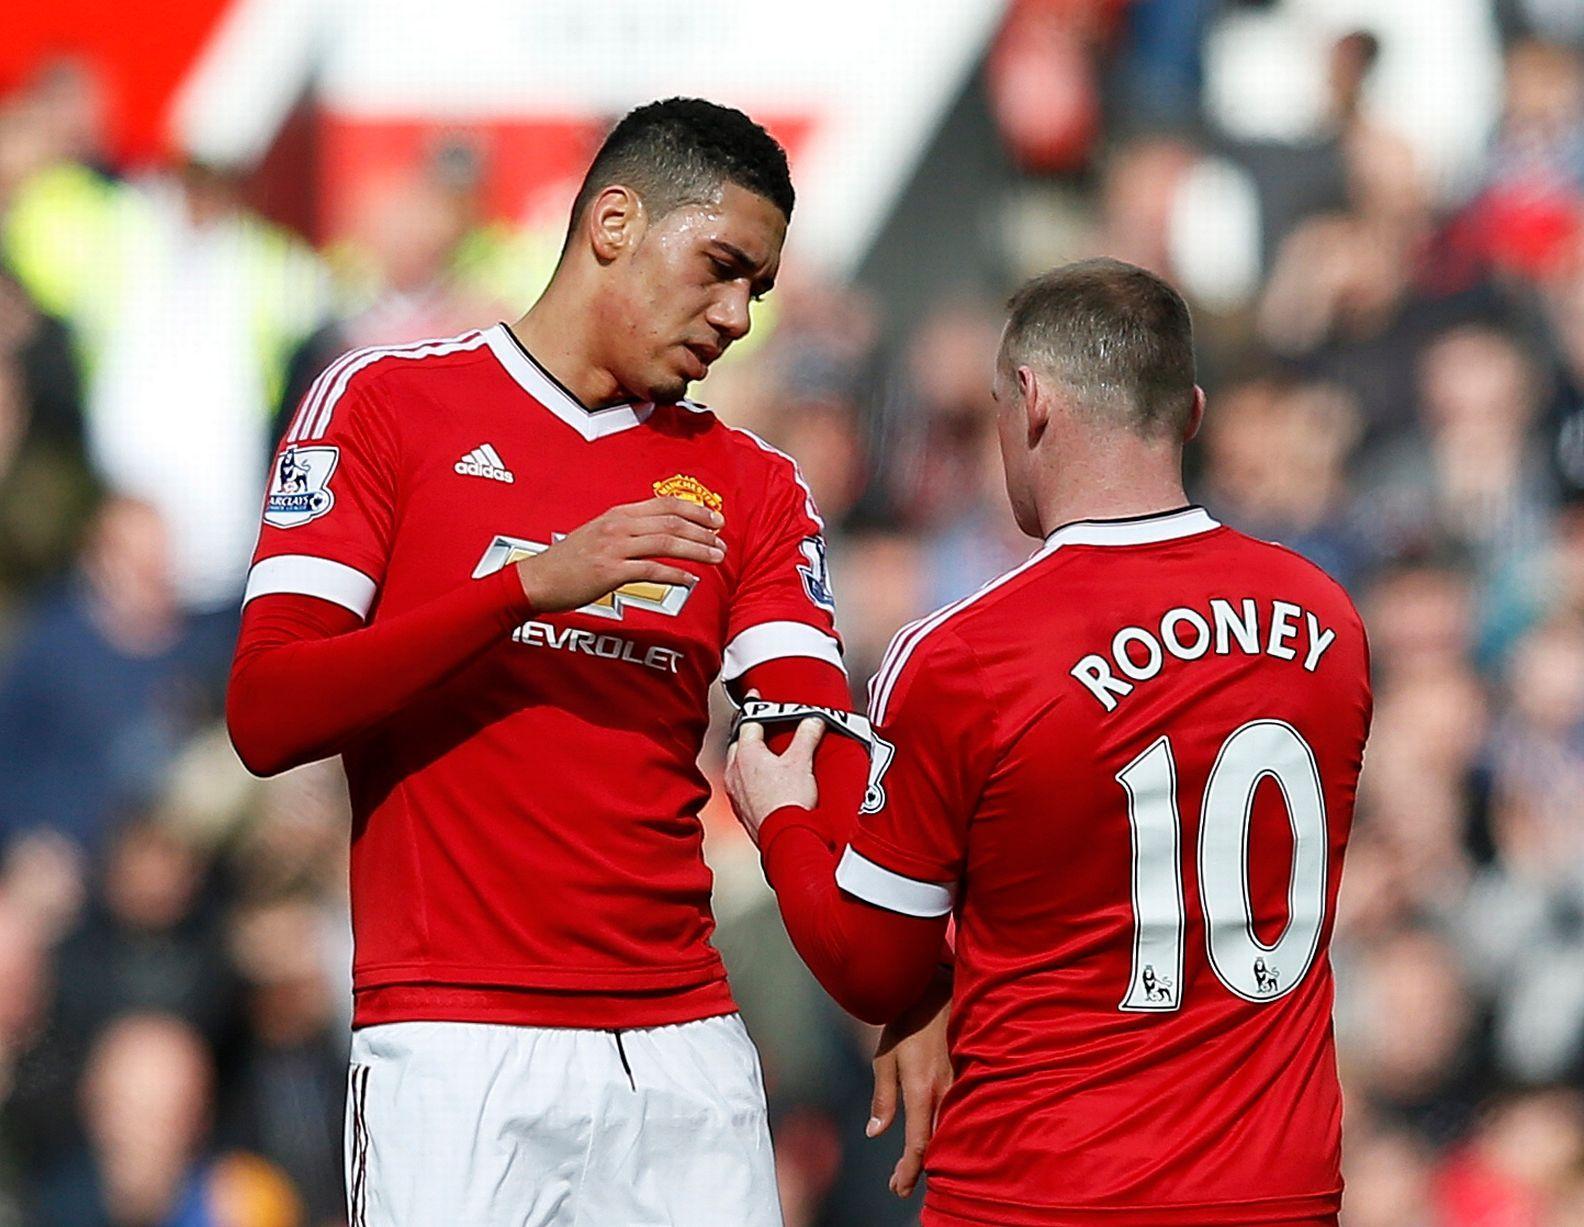 Wayne Rooney hands the captains armband to Chris Smalling as he is